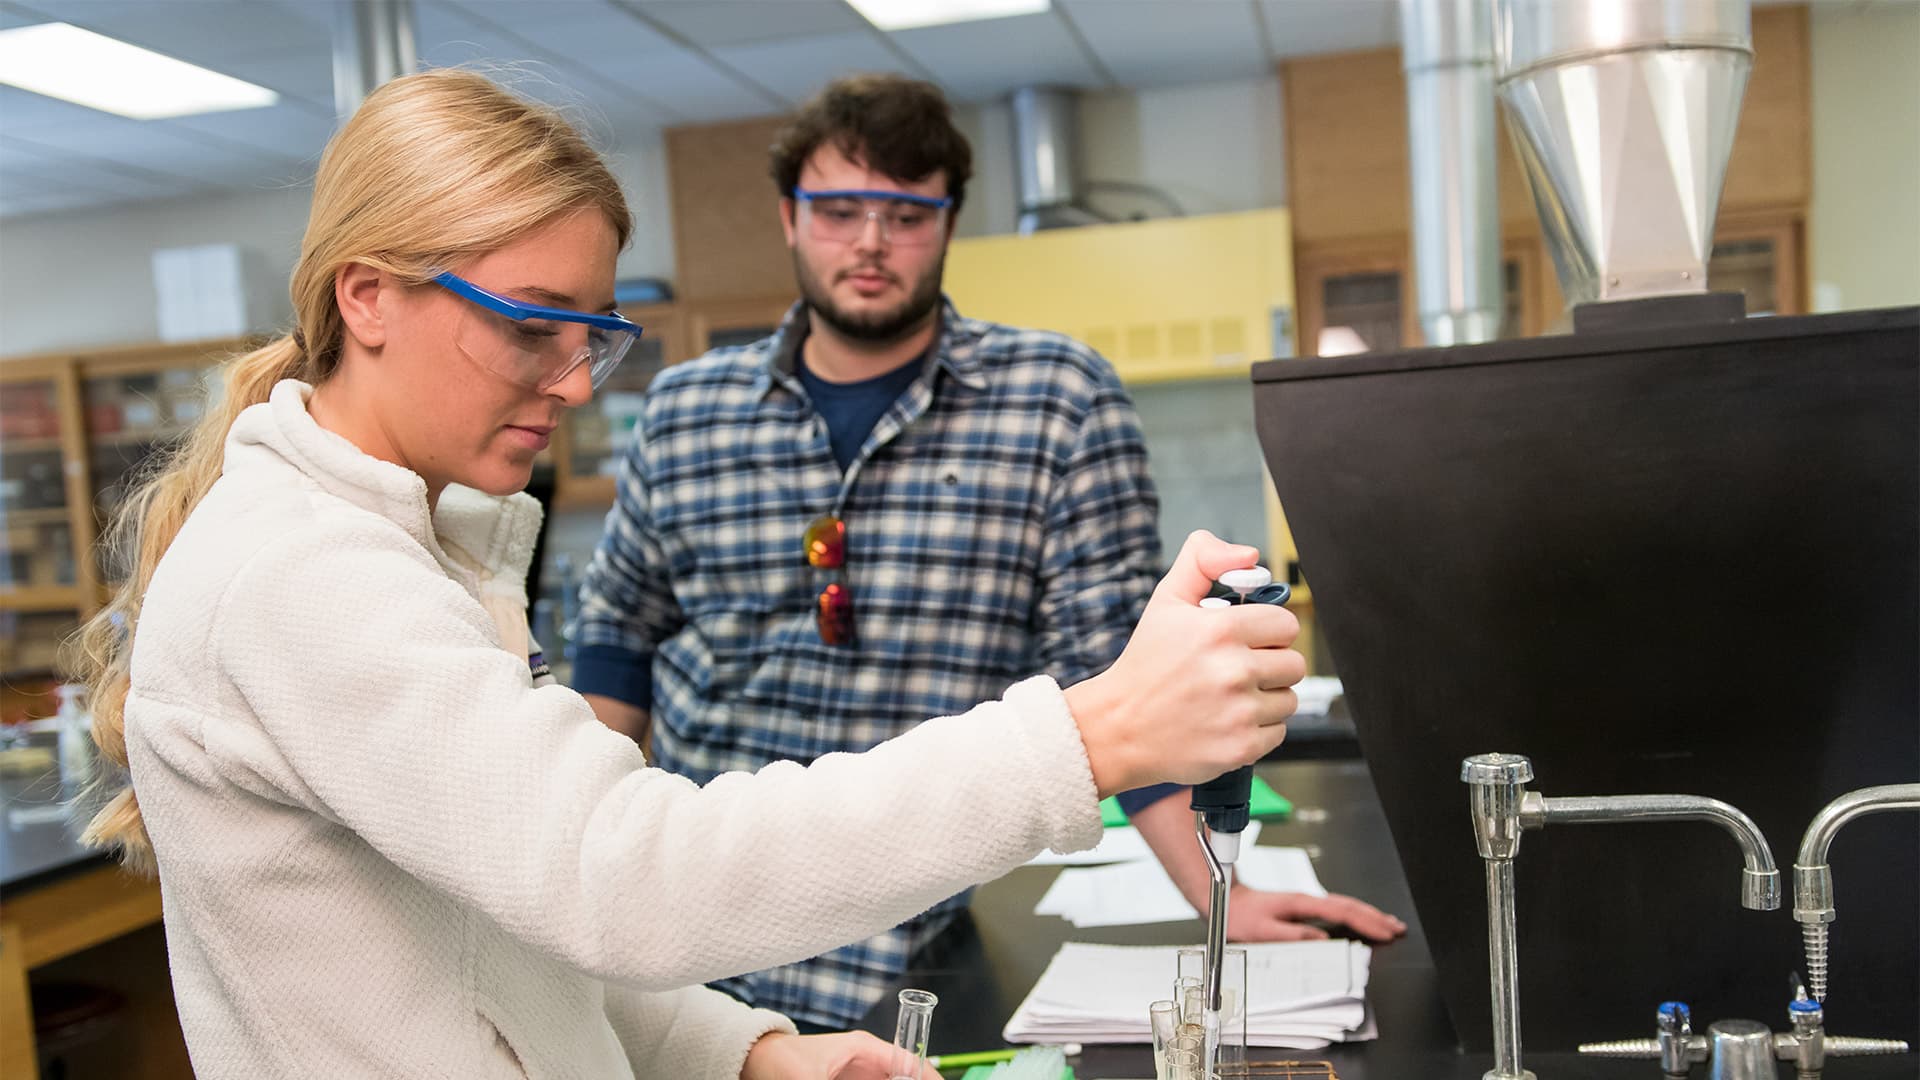 a male and female student work together in a chemistry lab performing an experiment